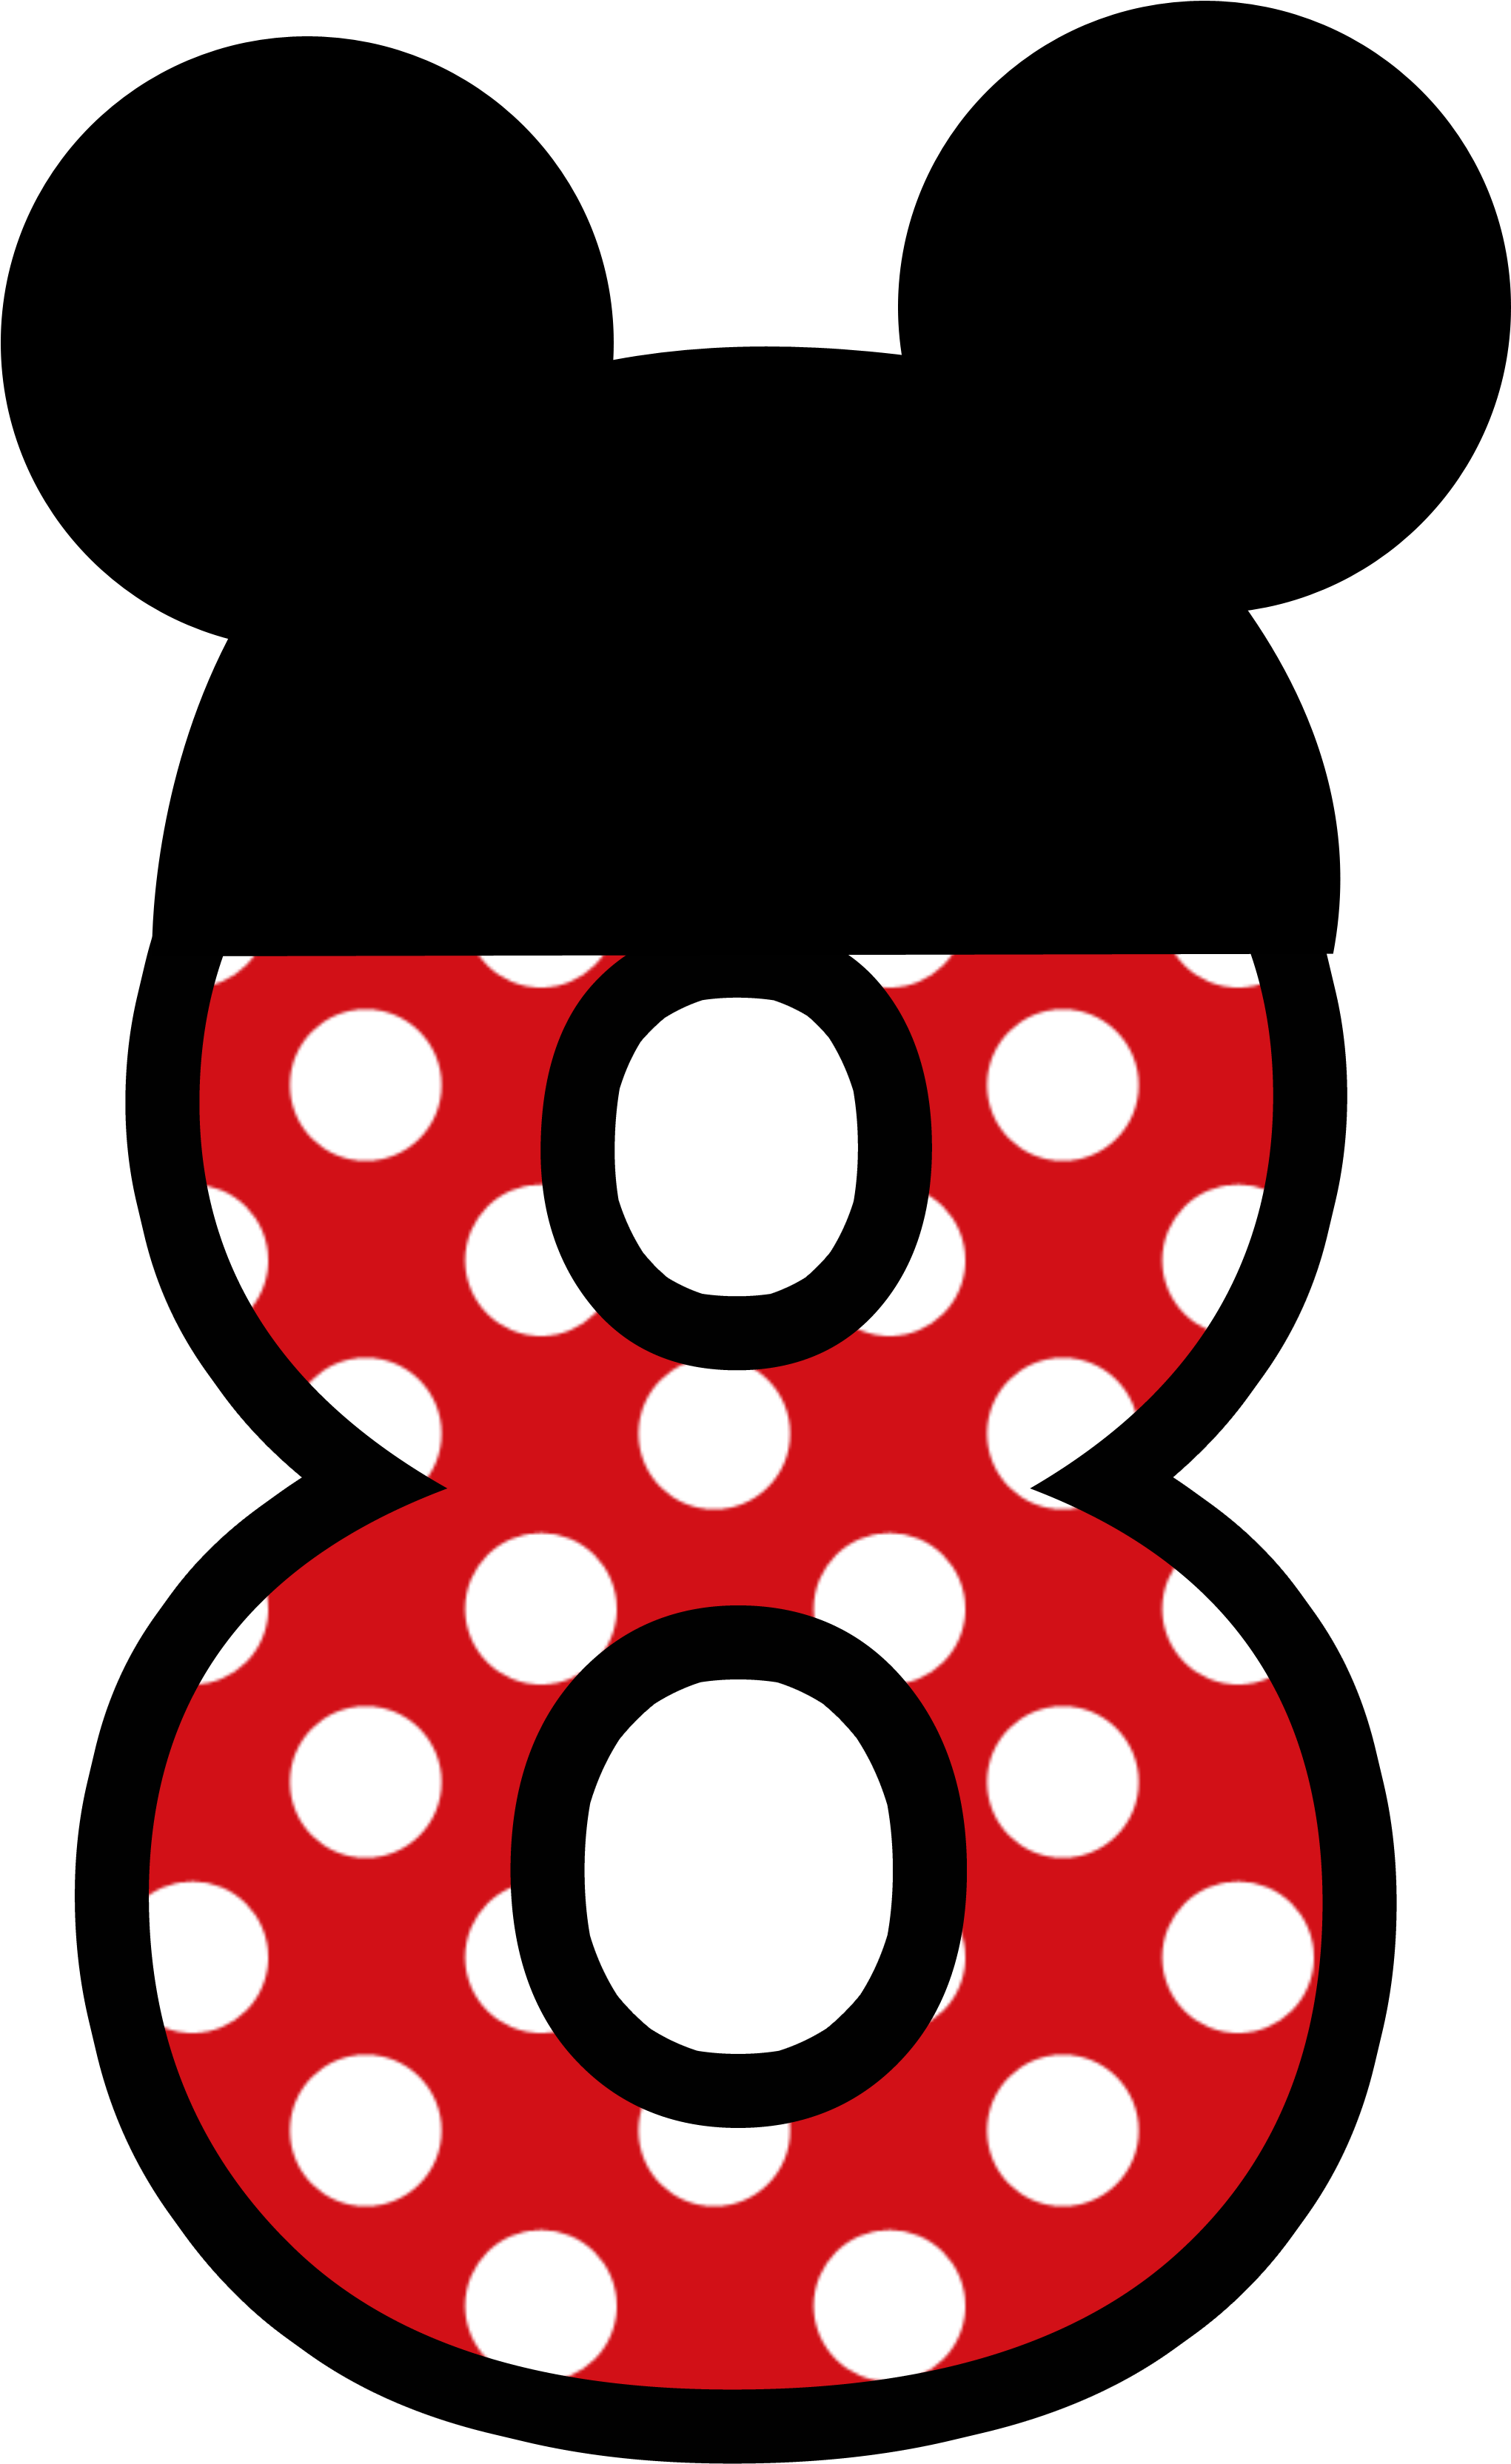 A Red And White Polka Dot Number